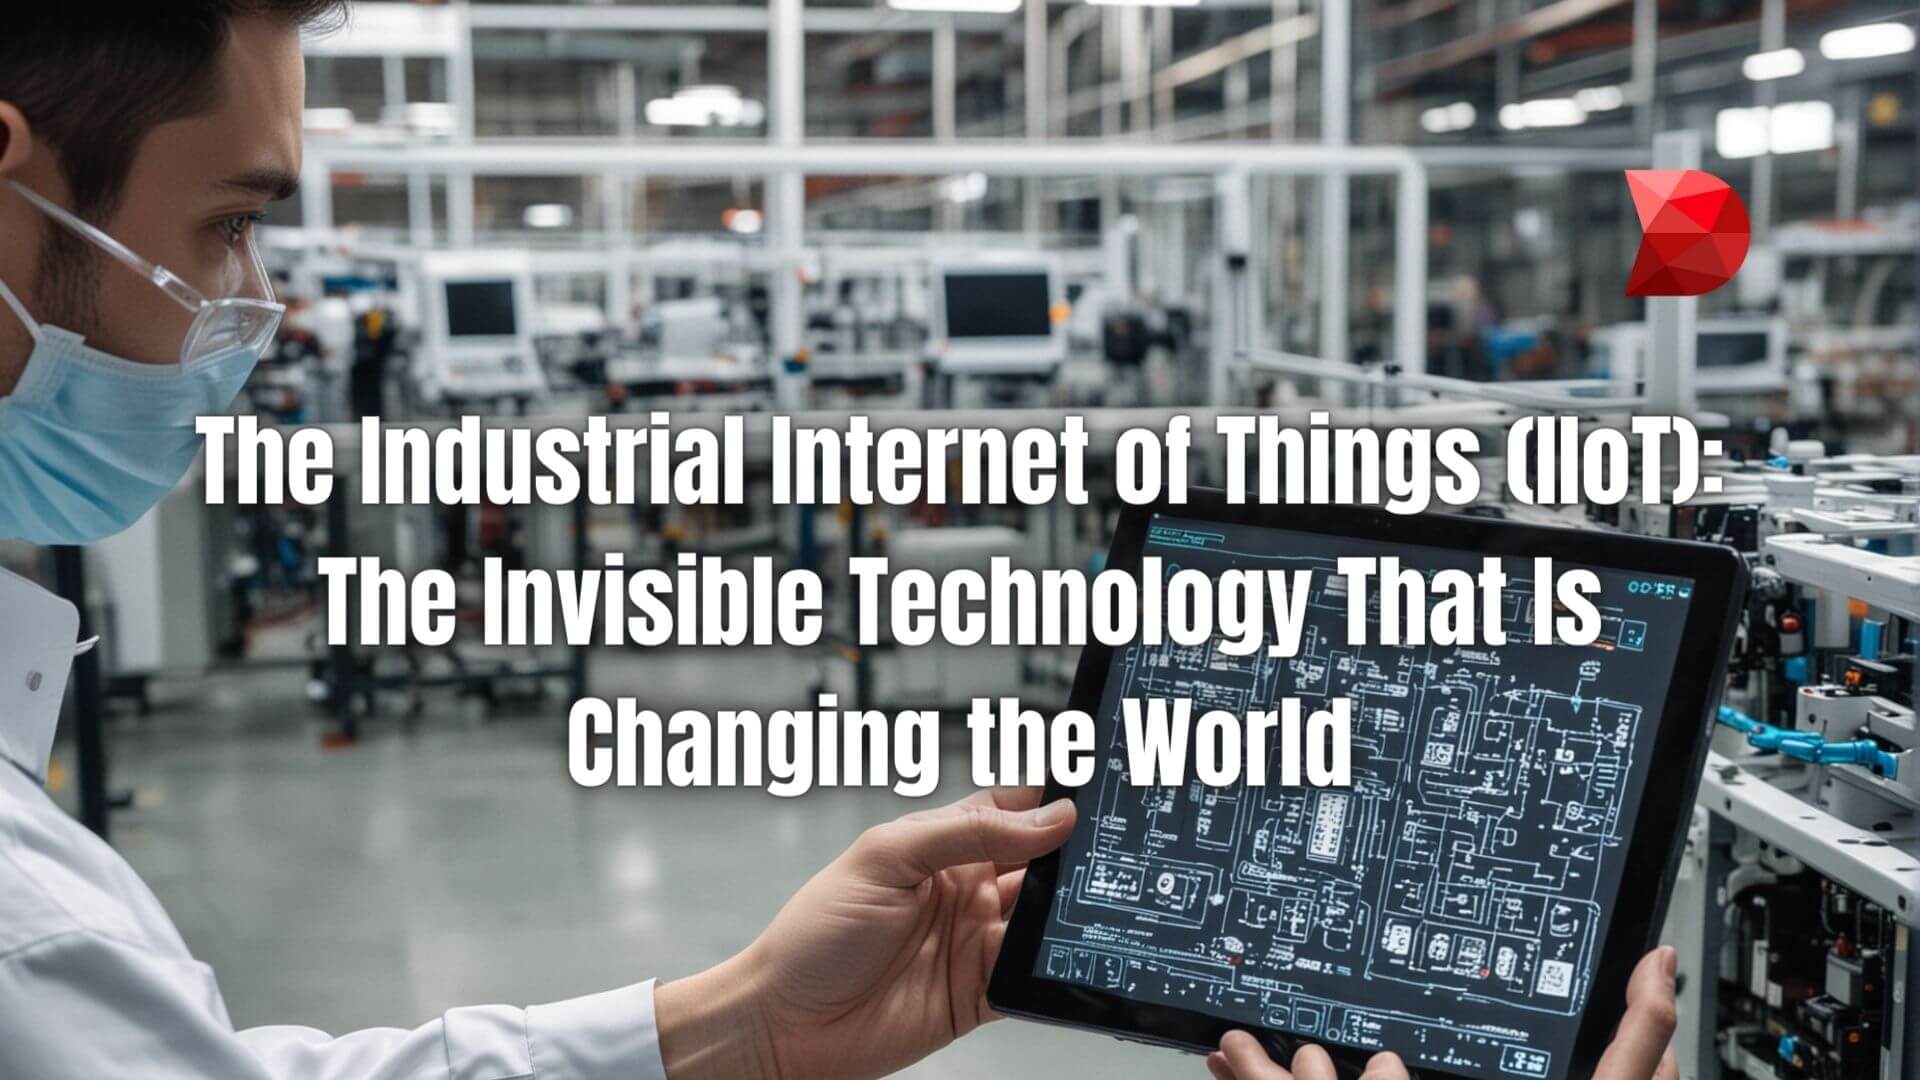 Explore the transformative power of IIoT with our guide. Discover how this invisible technology is revolutionizing industries worldwide.